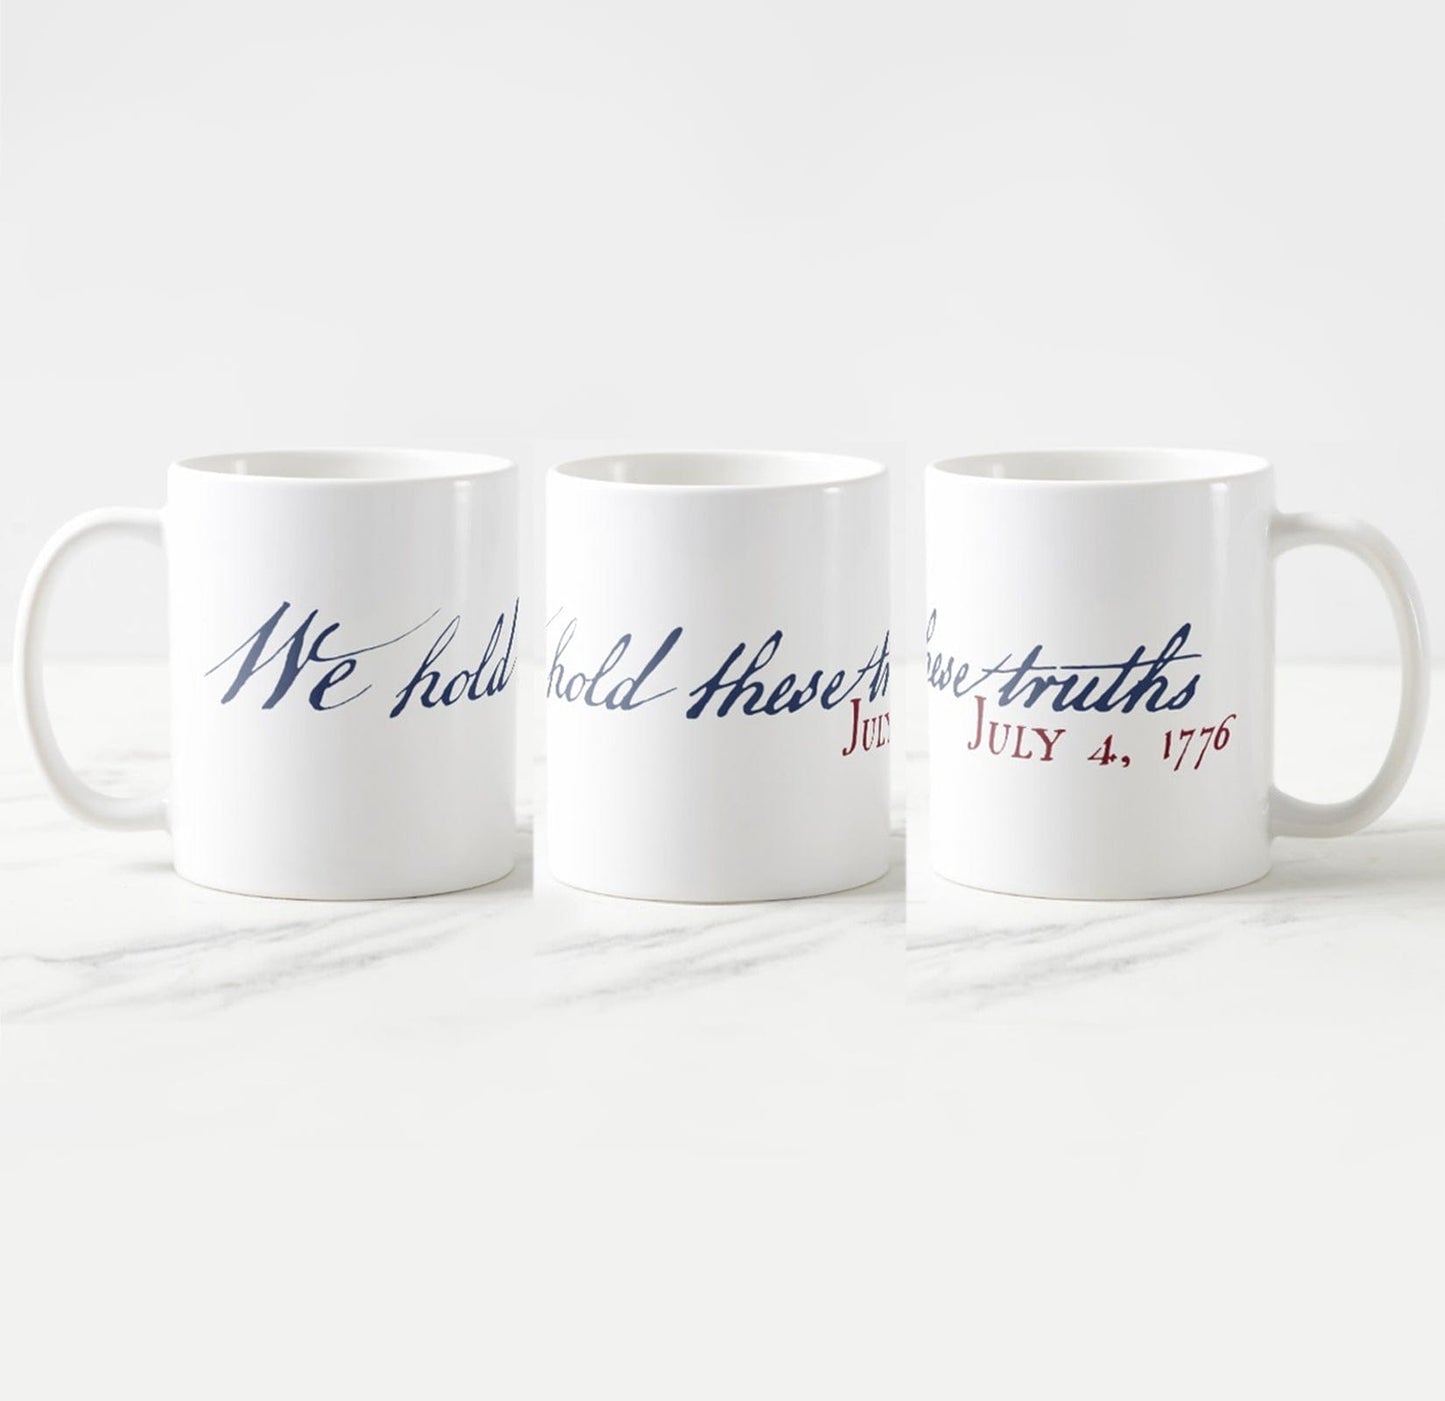 "We hold these truths - July 4, 1776" Mugs from The History List Store